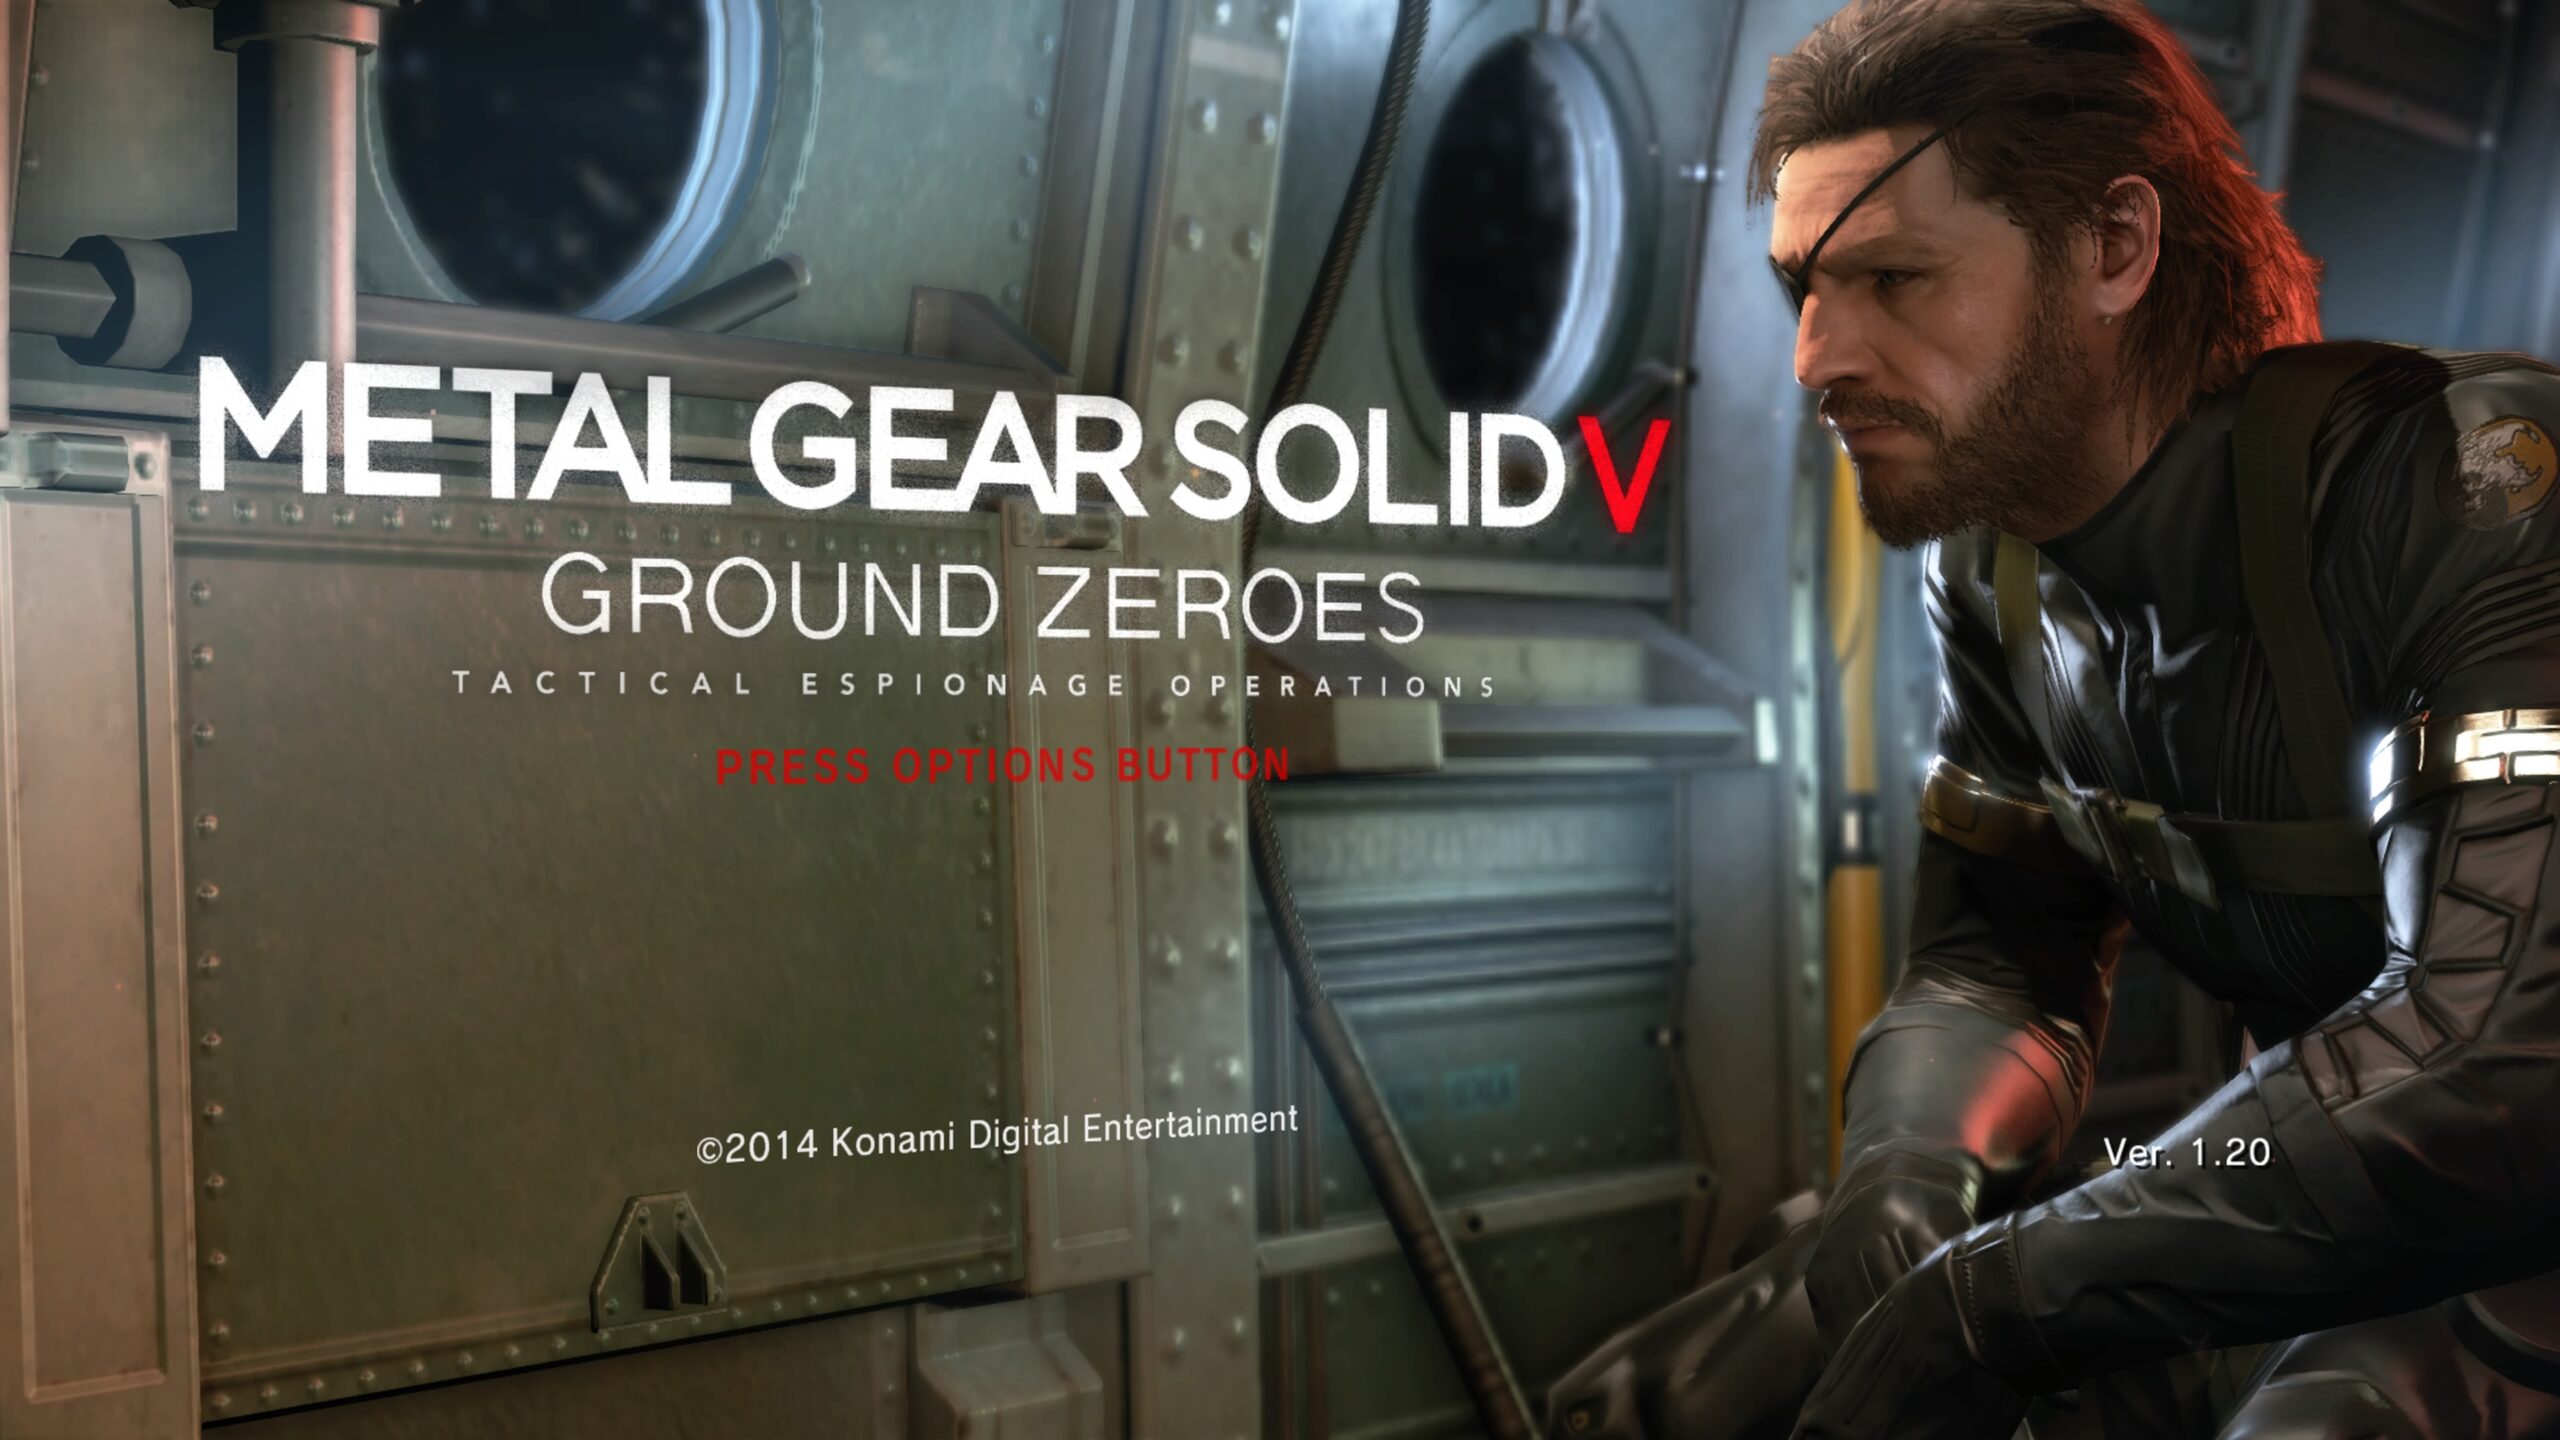 METAL-GEAR-SOLID-V_-GROUND-ZEROES